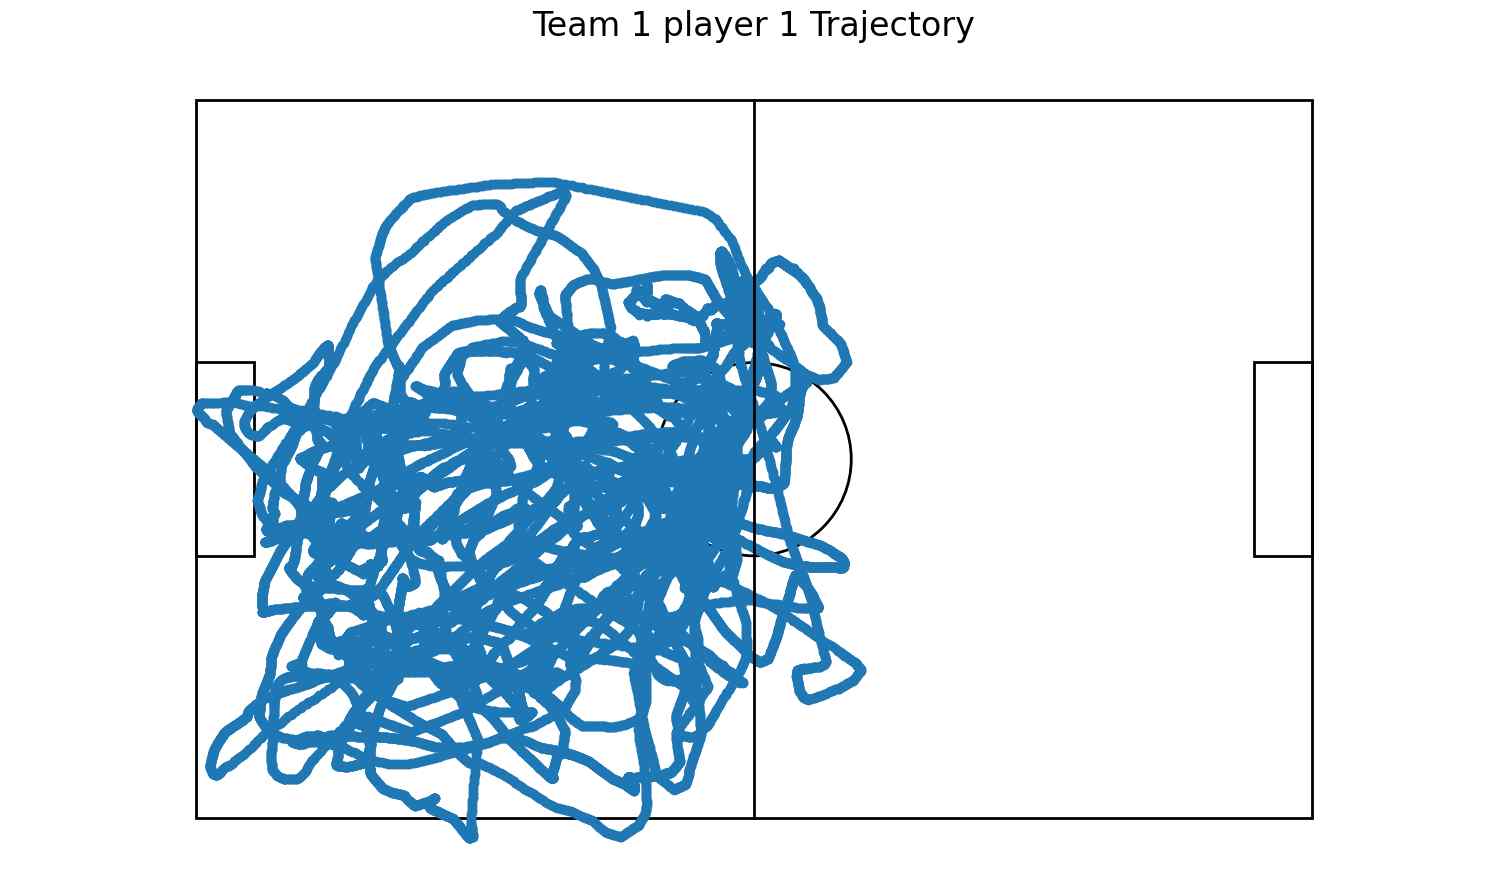 A scatter plot showing the trajectory of a soccer player in Team 1 during a 30-minute match, plotted on a top-view diagram of a soccer field.